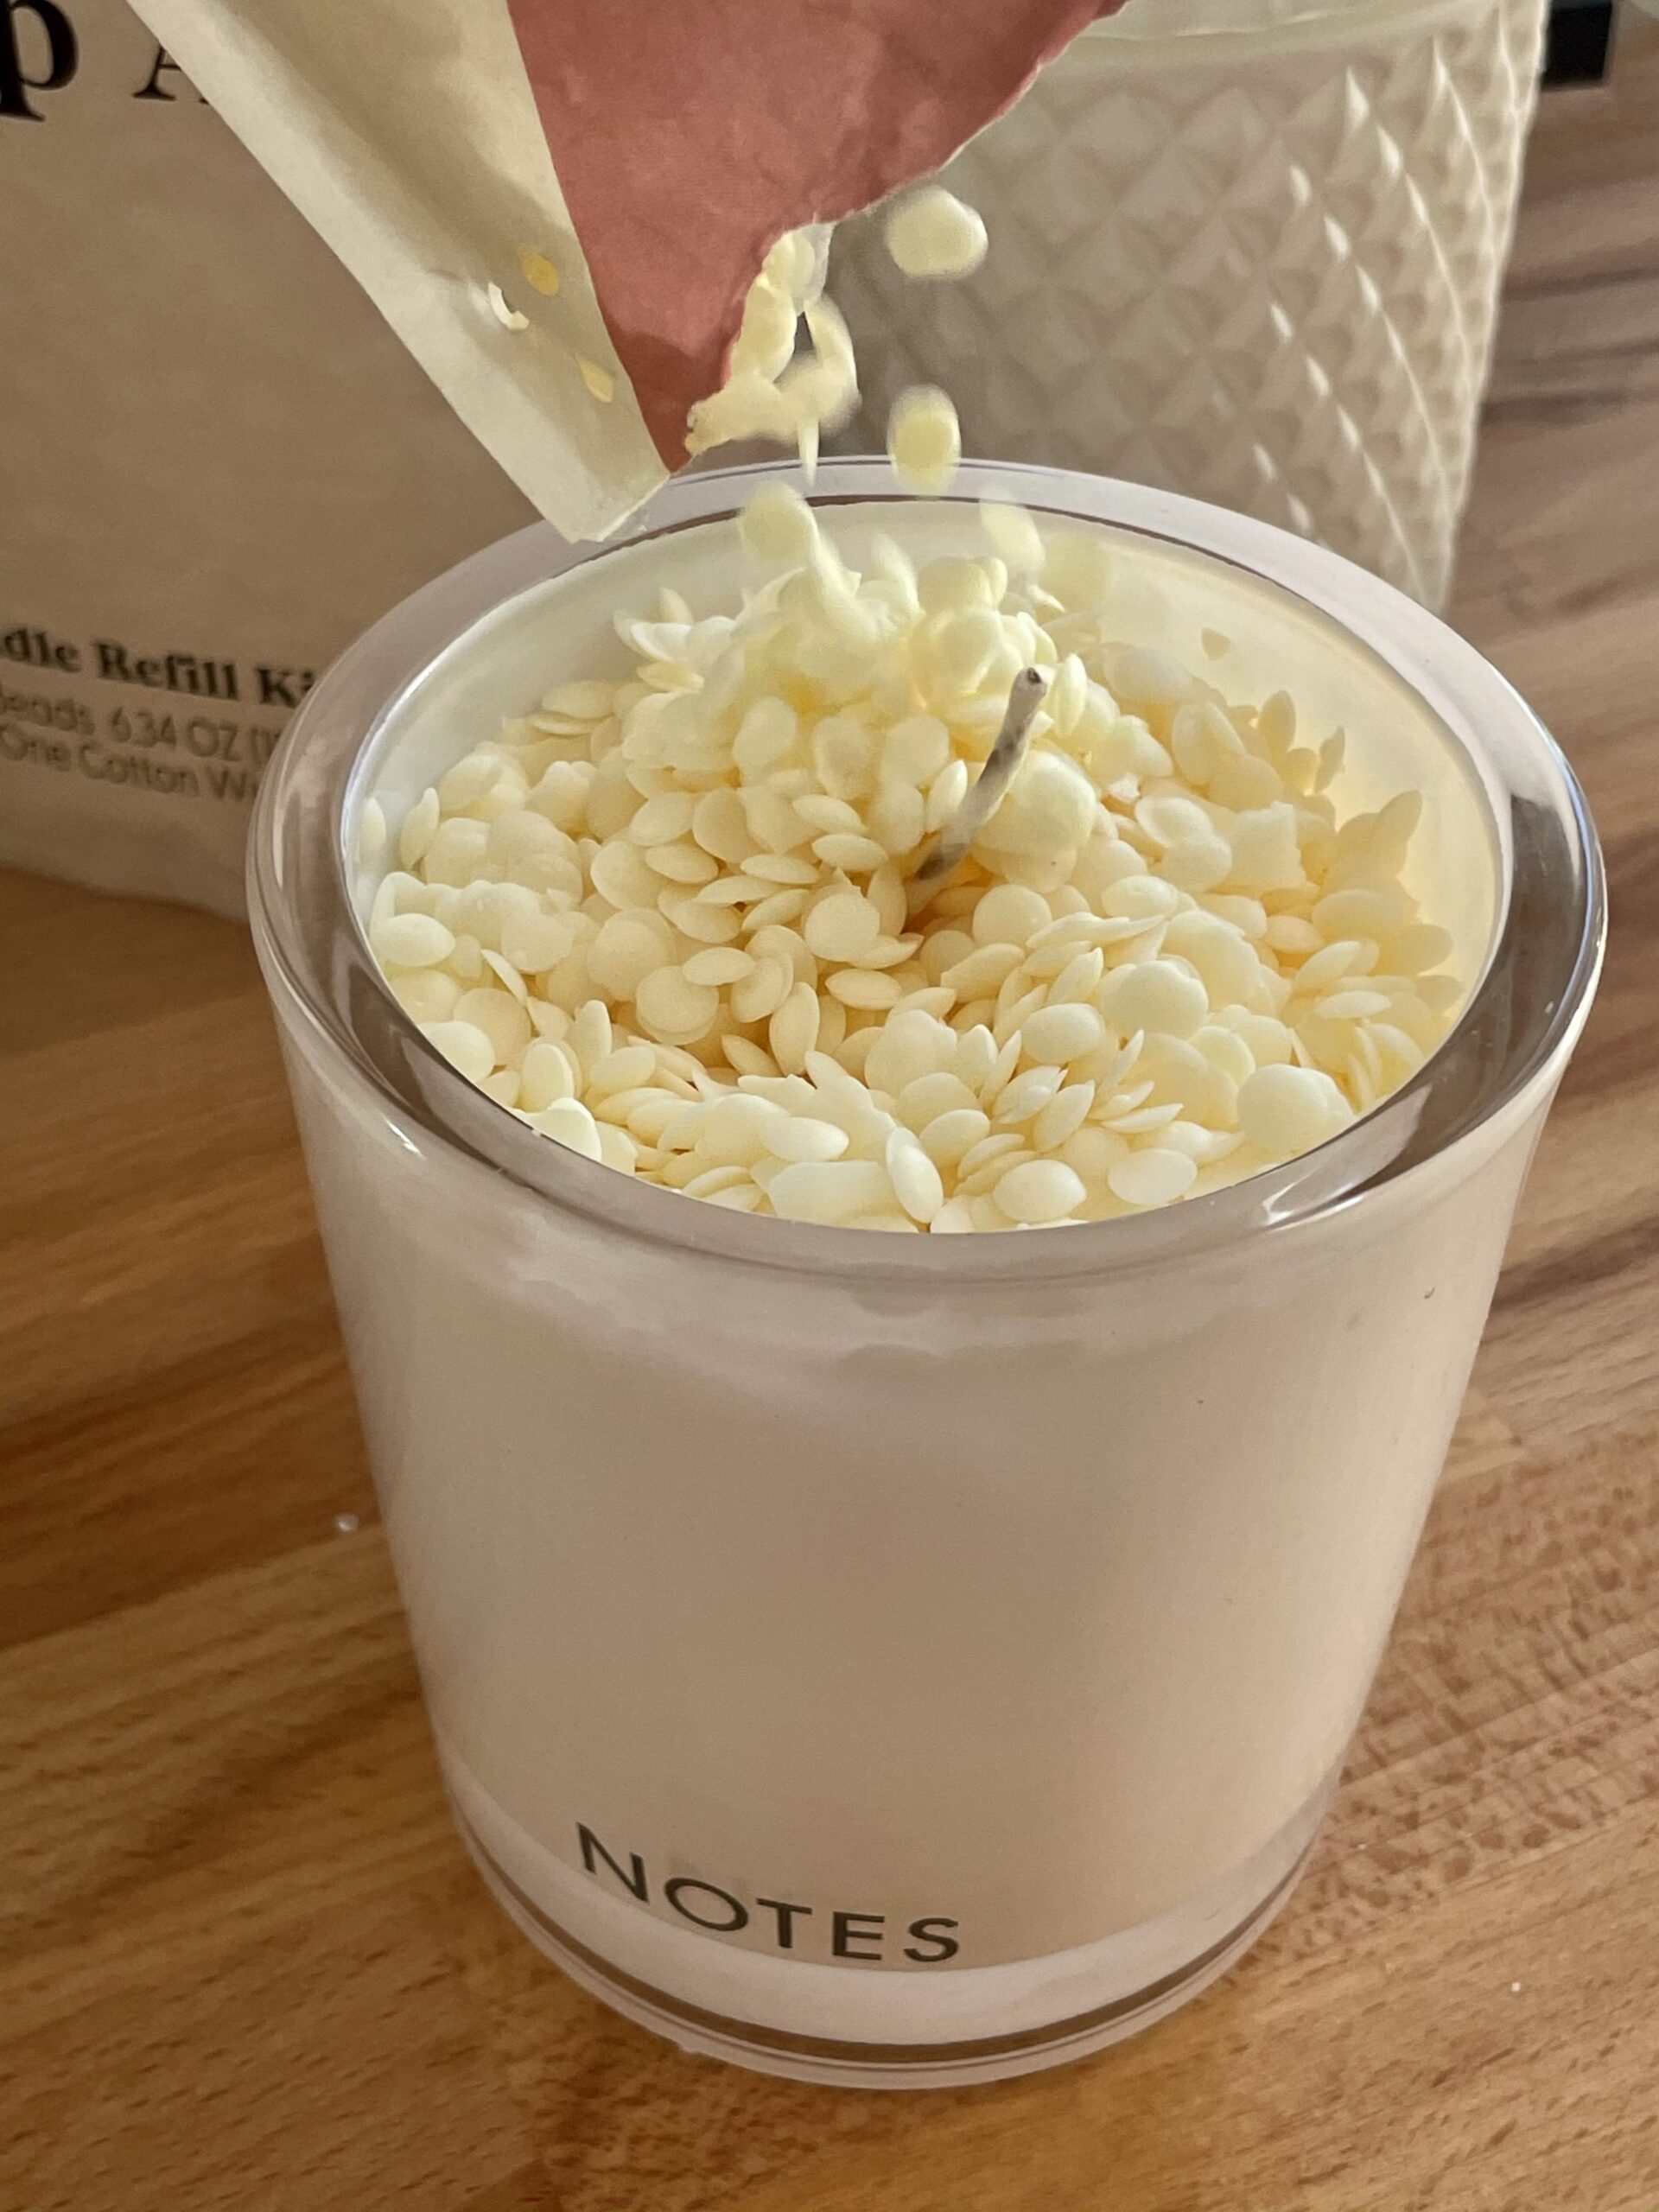 Notes candle refill